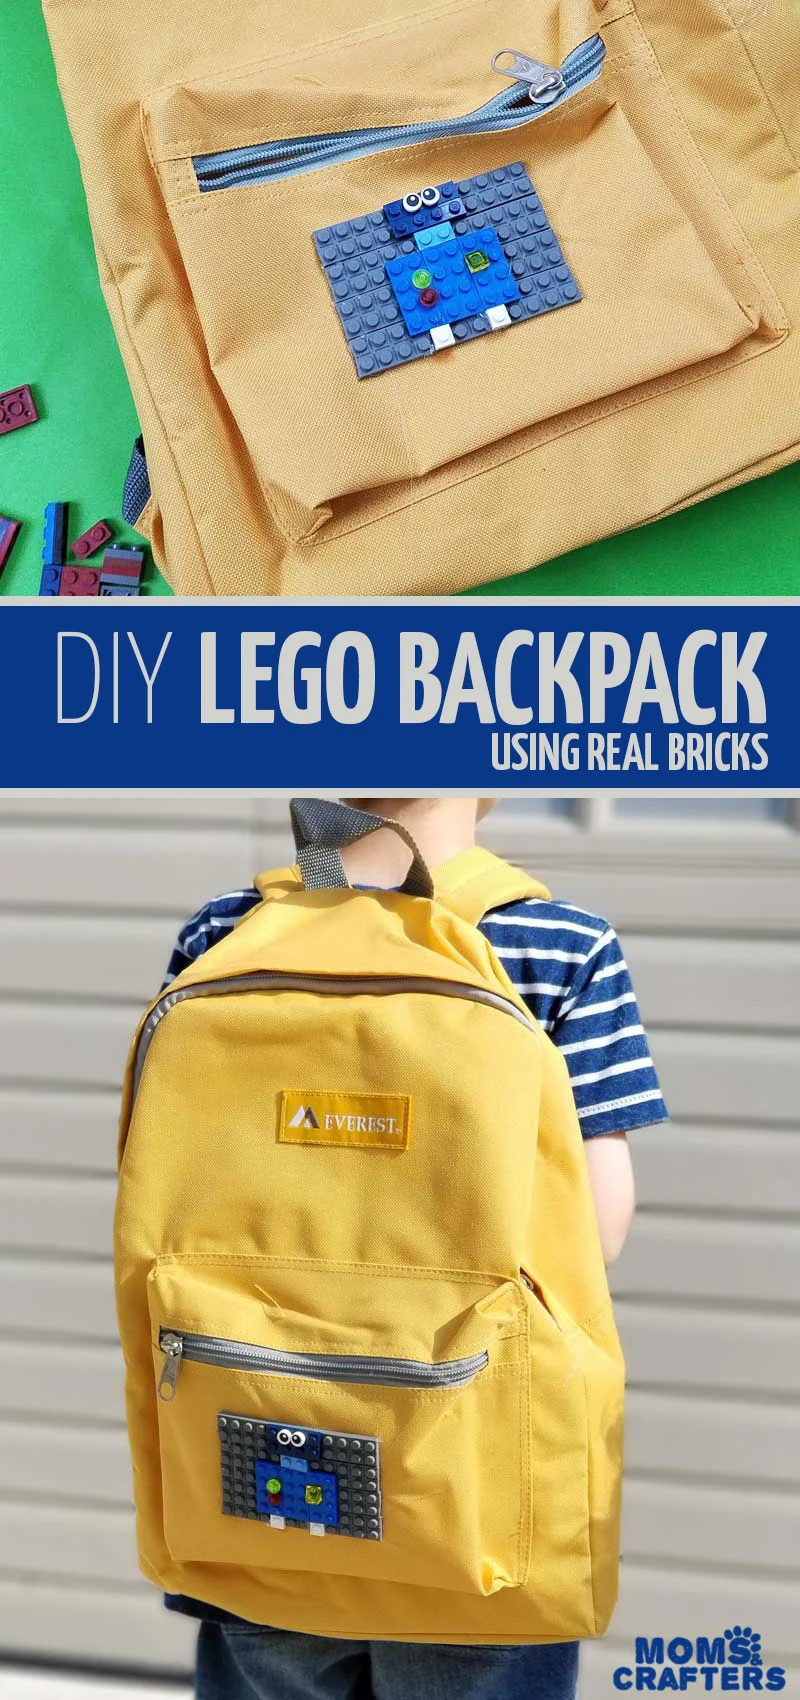 Click to learn how to make your own DIY LEGO backpack with this adorable back to school craft for kids, teens, and tweens! This awesome DIY project for boys and girls is a fun backpack craft to make your own book bag for school #backtoschool #lego #crafts